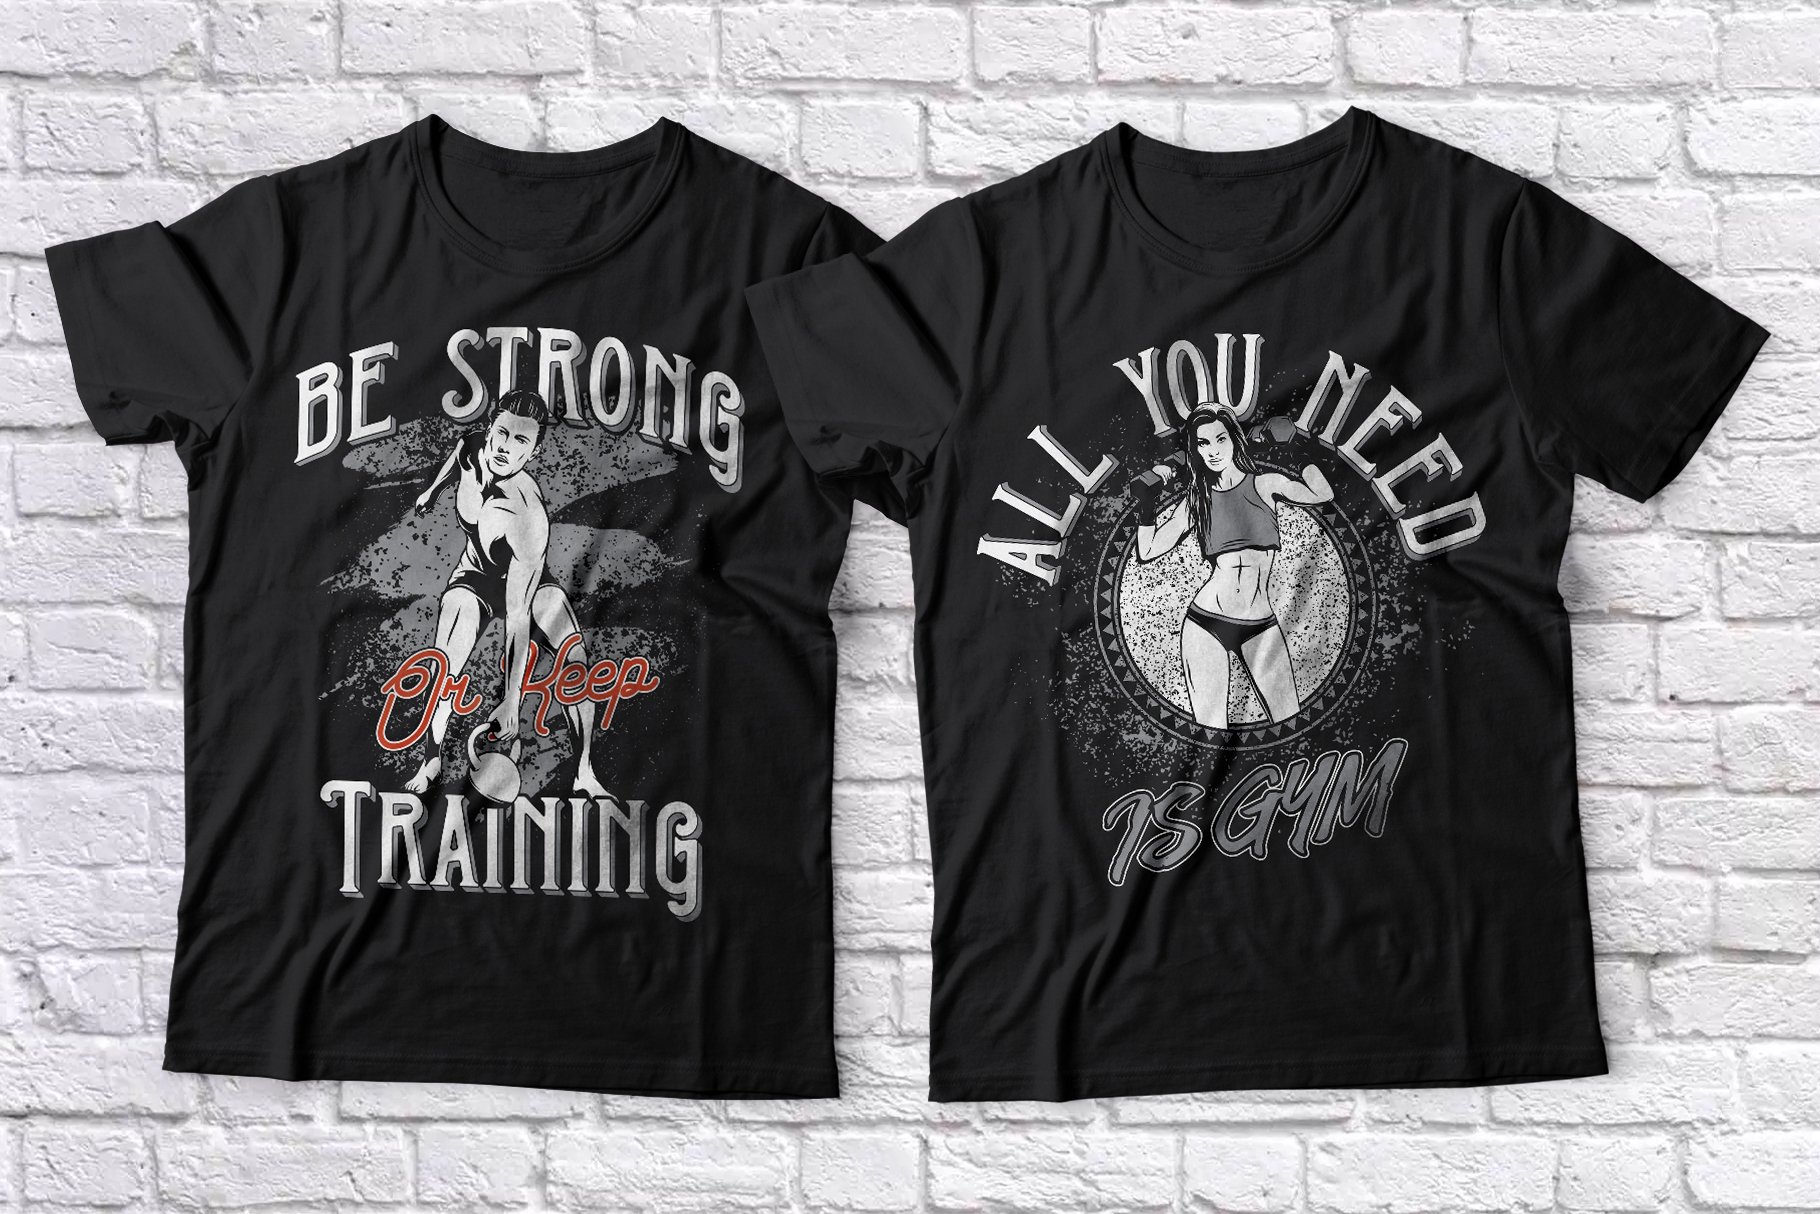 A set of black t-shirts in black with a charming print for men and women working out in the gym.